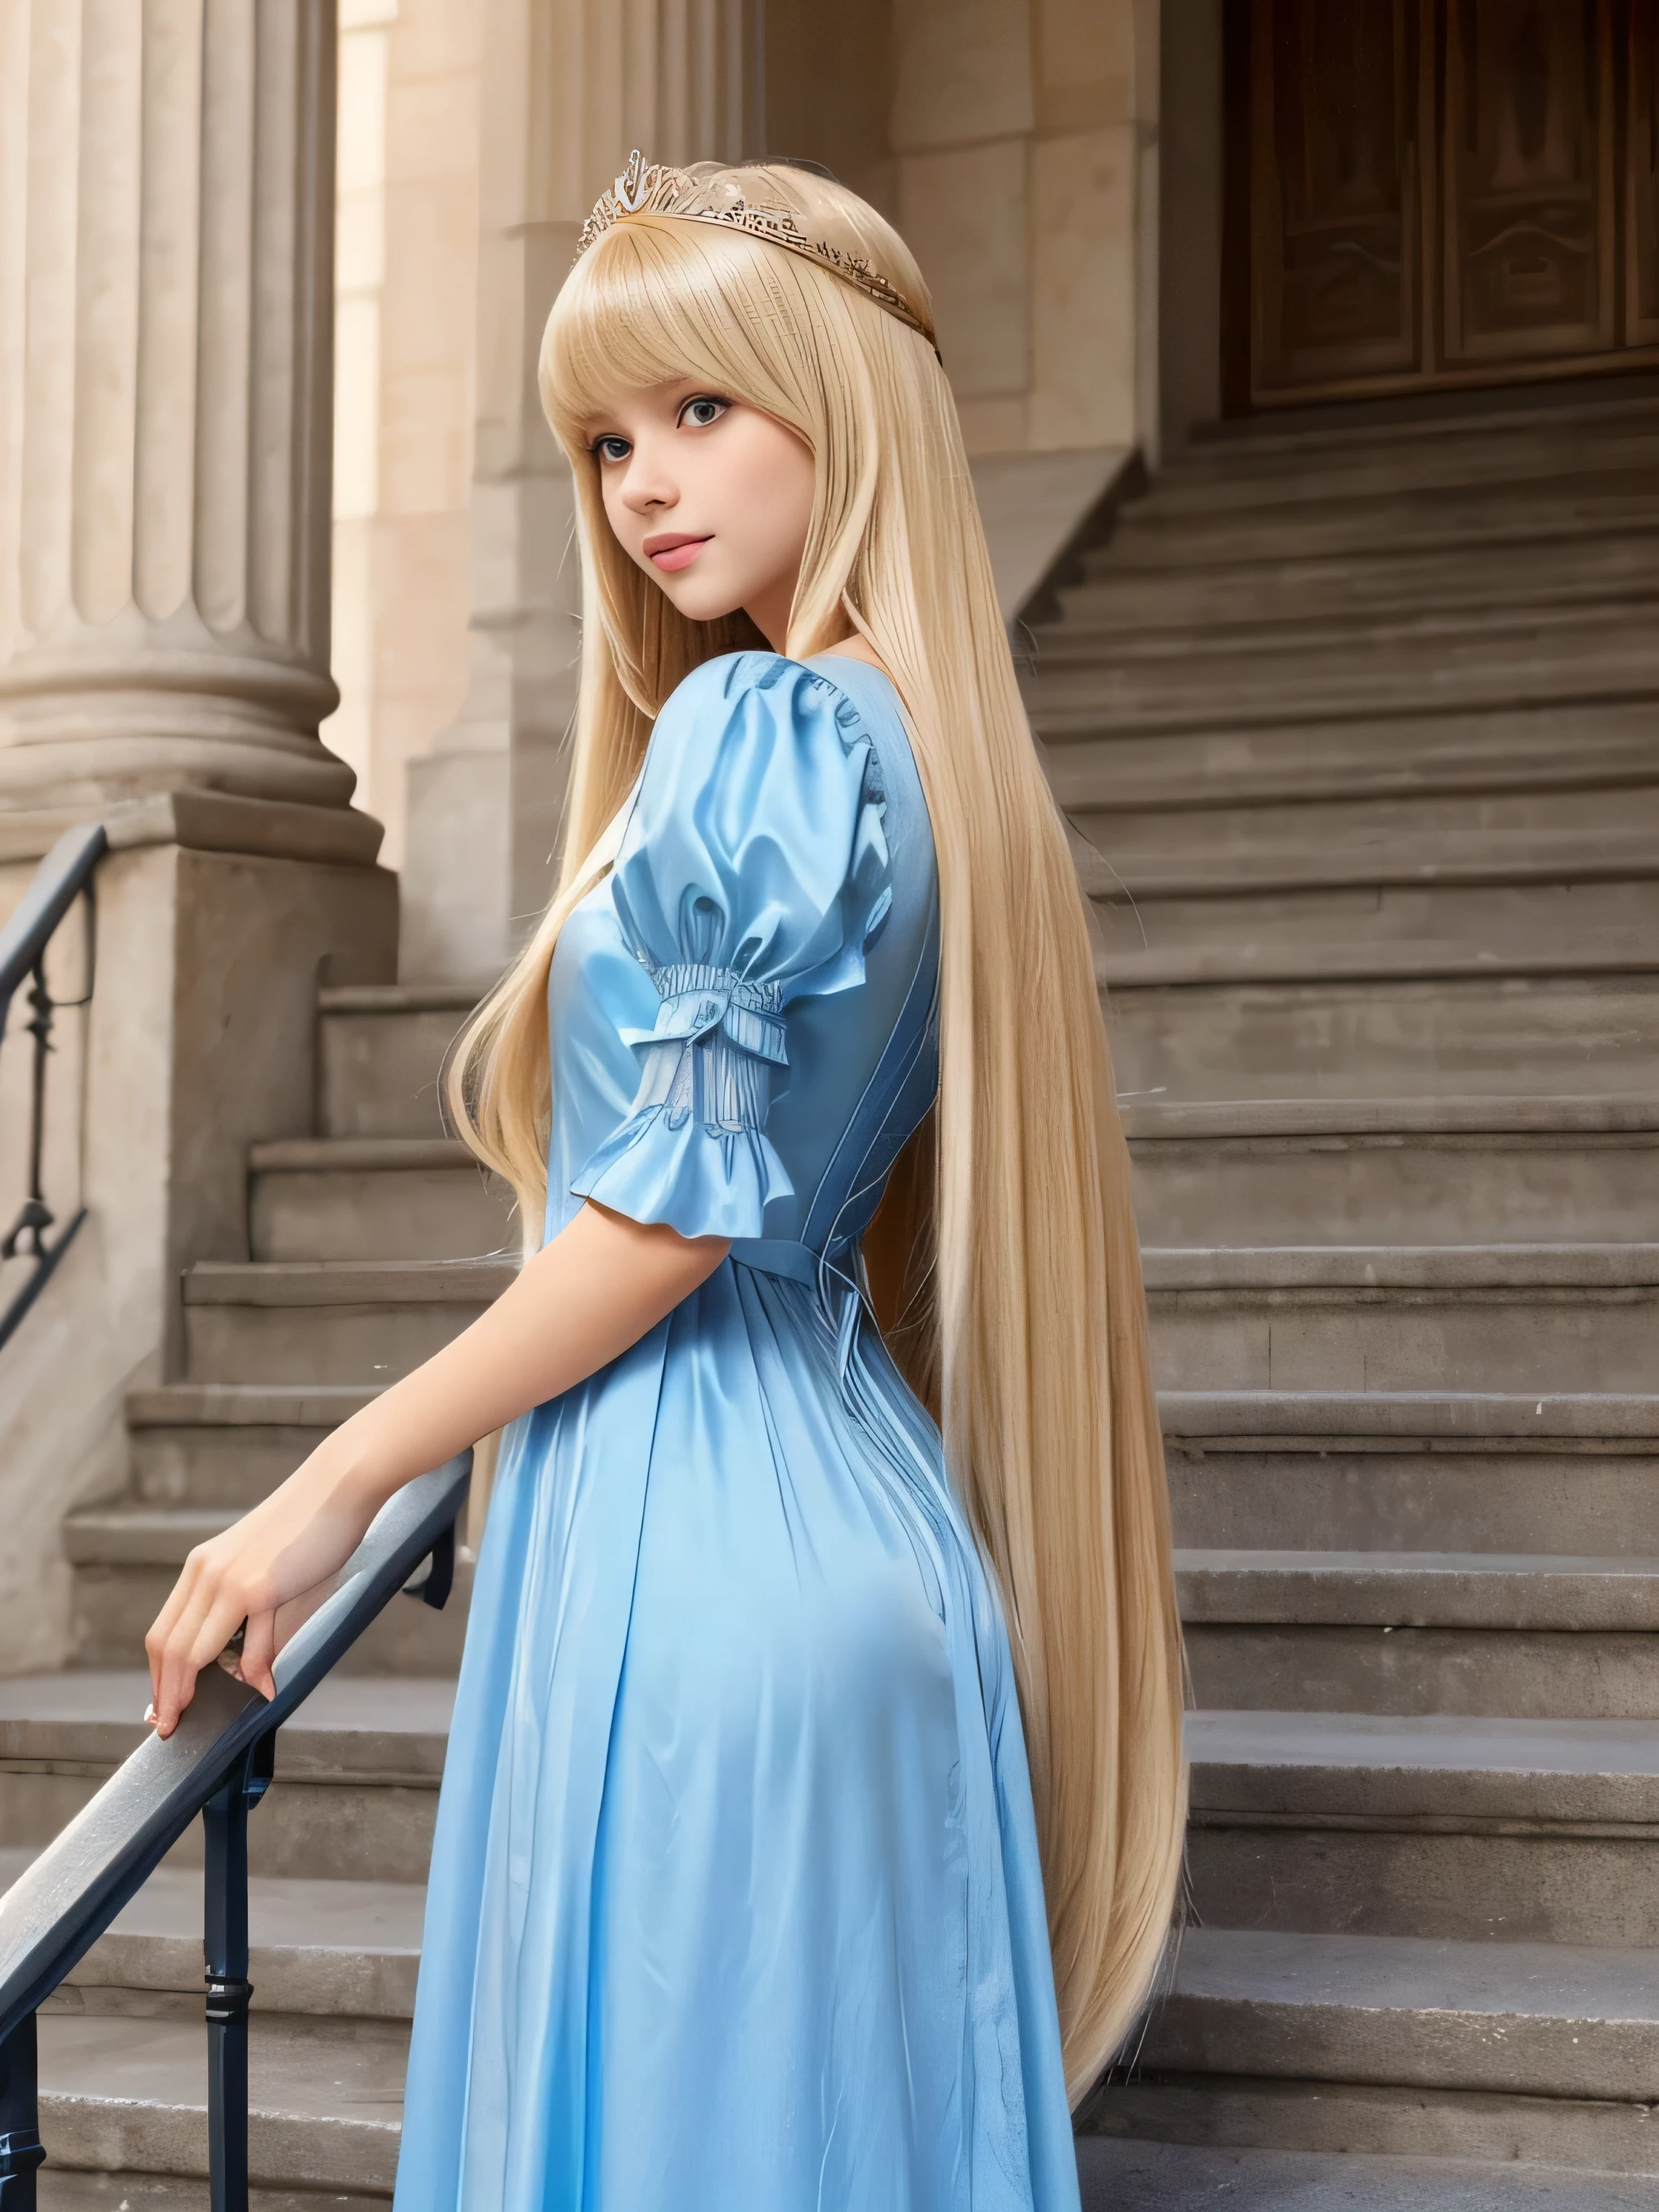 ((Full Shot:1.3))　(big 1.4)　Beautiful Fantasy Girl　((highest quality)), ((masterpiece)), (Get used to it), Perfect Face　(1 girl)　(French)　(She is 15 years old、The cutest teen in France.)　((highest quality)), ((masterpiece)), length blonde hair 　length, shining golden hair,Golden Silky Hair, Straight blonde hair, length blonde straight hair, Perfect Silky Straight Hair, Straight blonde hair, length blonde hair, Her hair is long and straight, detailed length blonde hair　((big 1.4))　Super Long Hair down to the ankles　((Neat bangs　The neatly trimmed bangs are princess cut and cover the entire forehead.......))...　bright crimson lips　good, Anatomically correct hand　Thin fingers　Anatomically correct five fingers　Sexy professional makeup　Beautiful French girl face, French facial features, Long Hair shiny Long Hair, length, shining golden hair, length, Straight Golden Hair, Her hair is long and straight, Super Long Hair girl, Silky Hair, length blonde hair, Silky Hair, length, Flat Hair, Silky texture, Long Hair, length, flowing blonde hair, thin and shiny hair　Anatomically correct、White beautiful human skin and detail of hands and fingers　Beautiful Eyes　Mouth Details　the corners of the mouth rise slightly　Cool look　　(The eyebrows are dark brown in color)　　(She is wearing the gorgeous blue dress worn by Cinderella in the live-action version.　Disney Color Photos、tumbler、Renaissance、Cinderella、She is wearing a gorgeous Victorian blue dress.)　(This is a 16th century European town.)